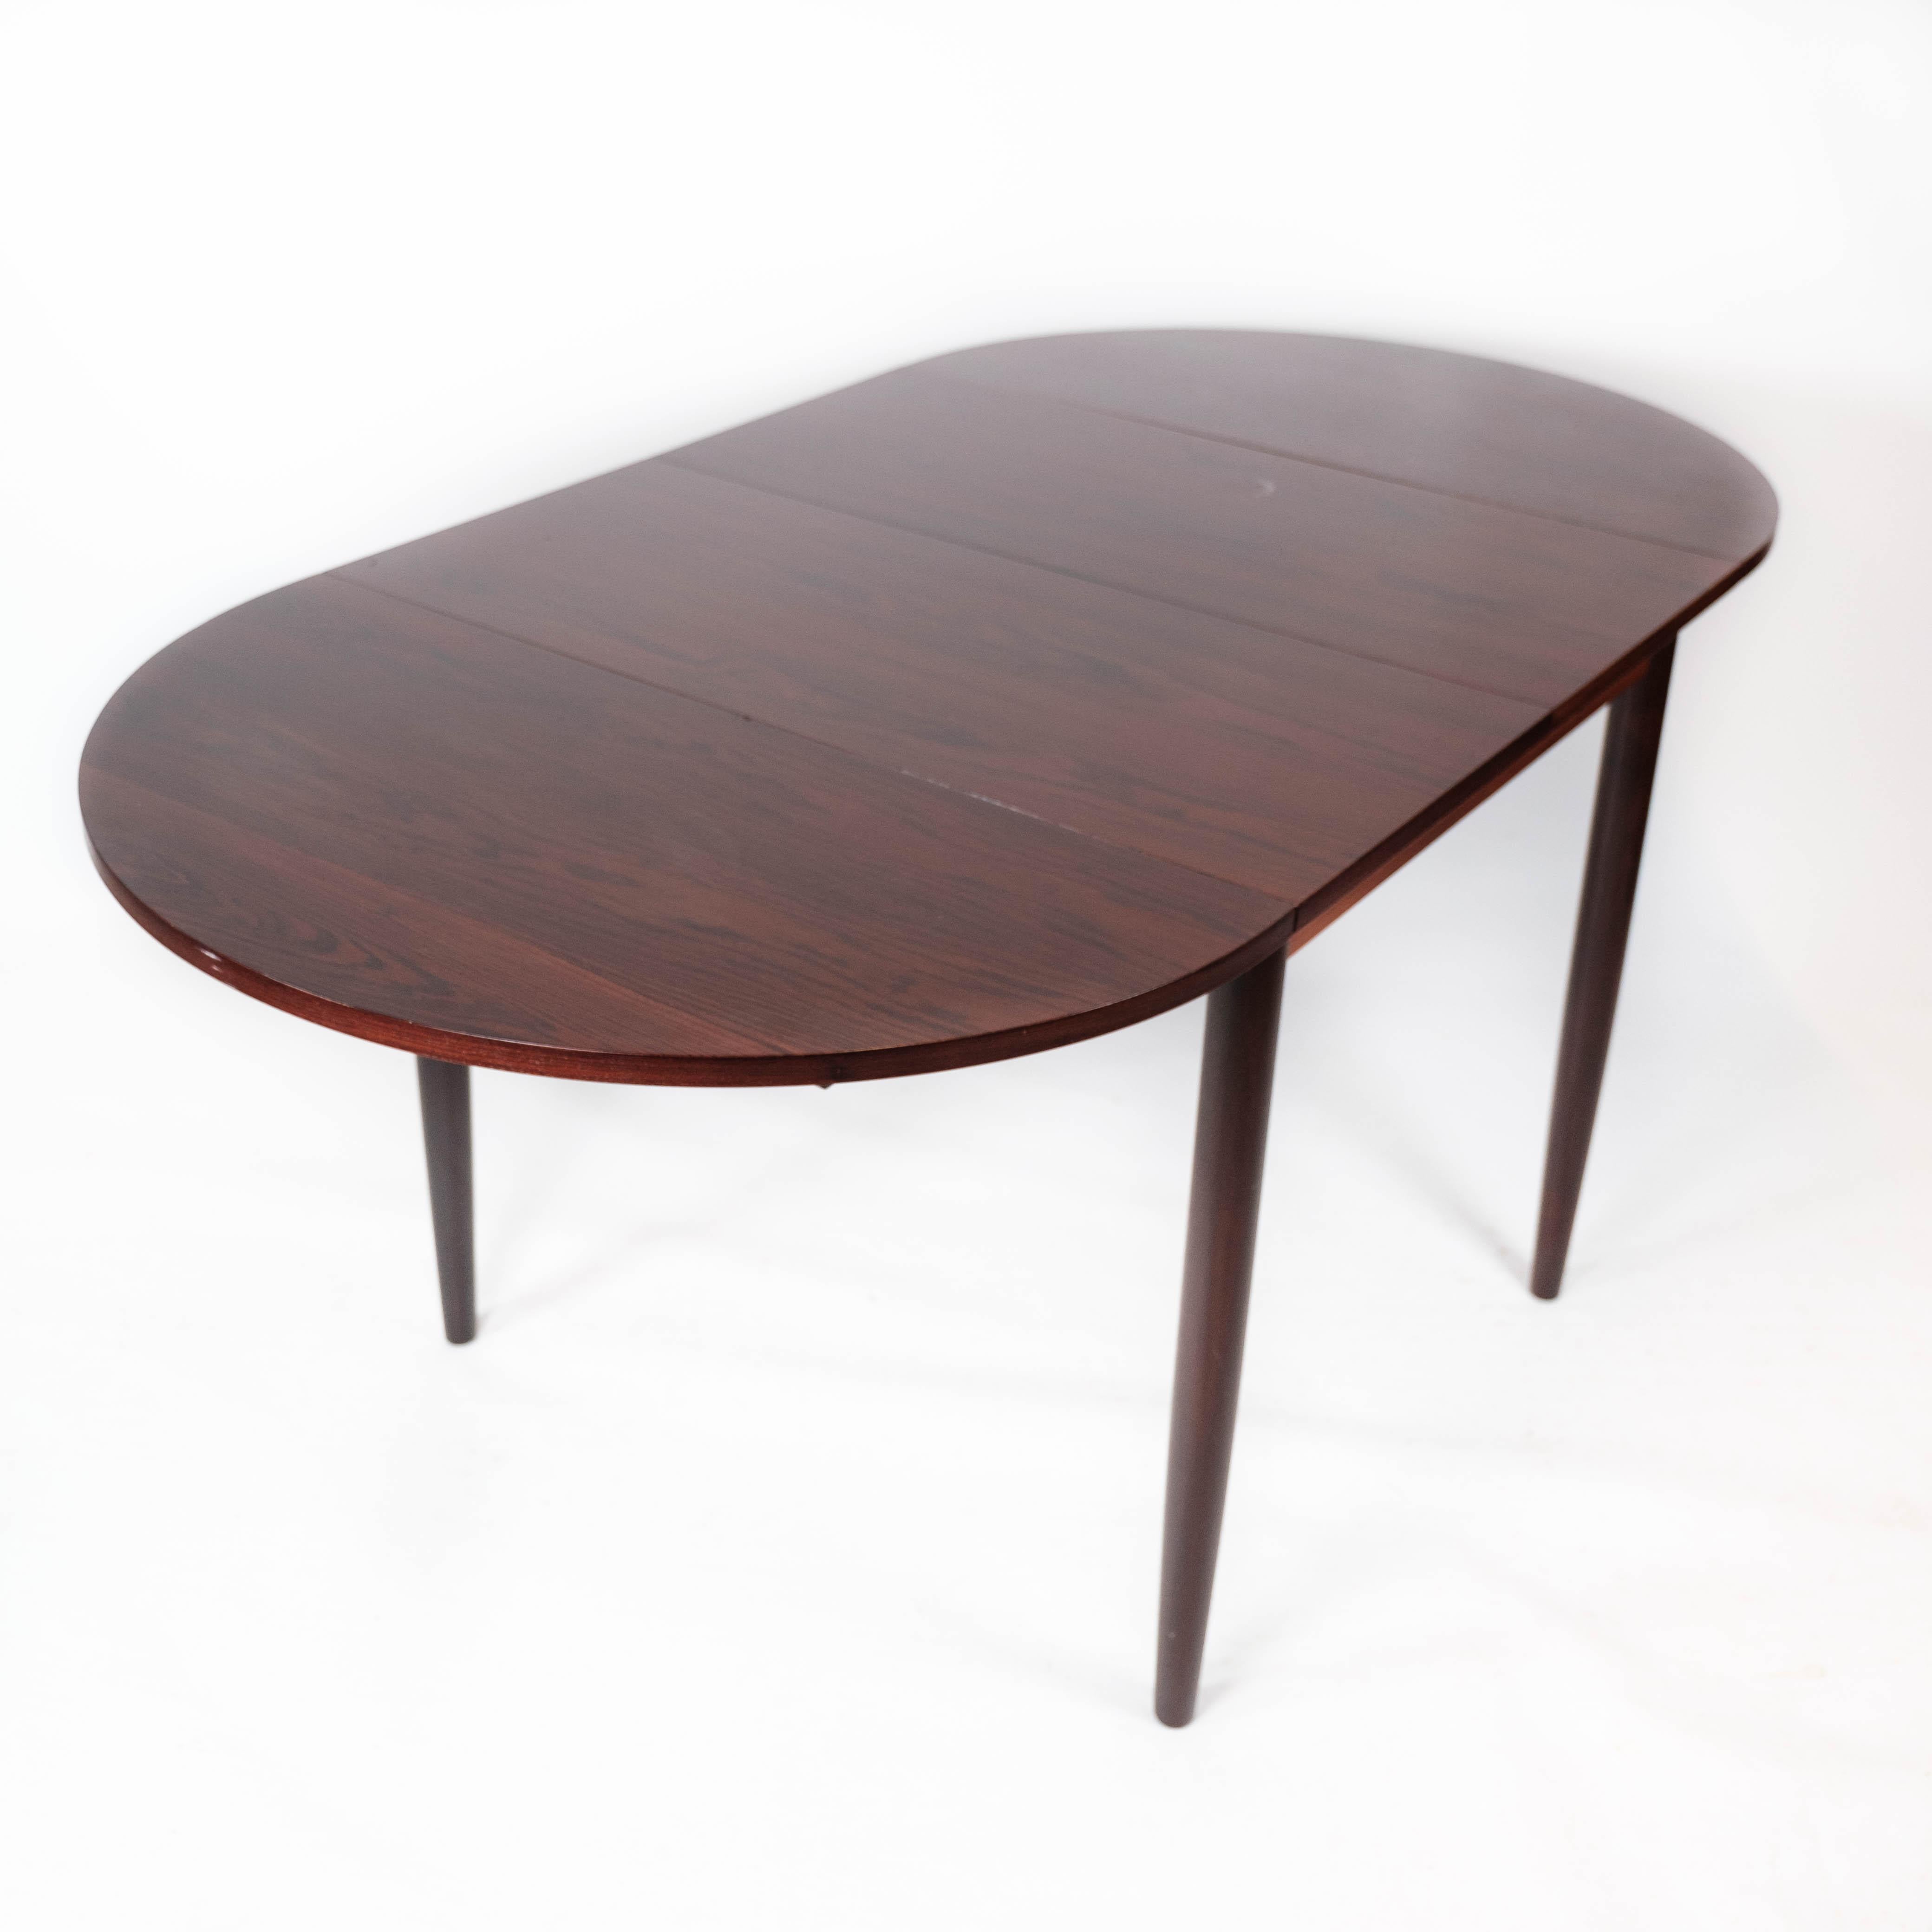 Dining Table Made In Rosewood With Extension Plates By Arne Vodder From 1960s For Sale 6